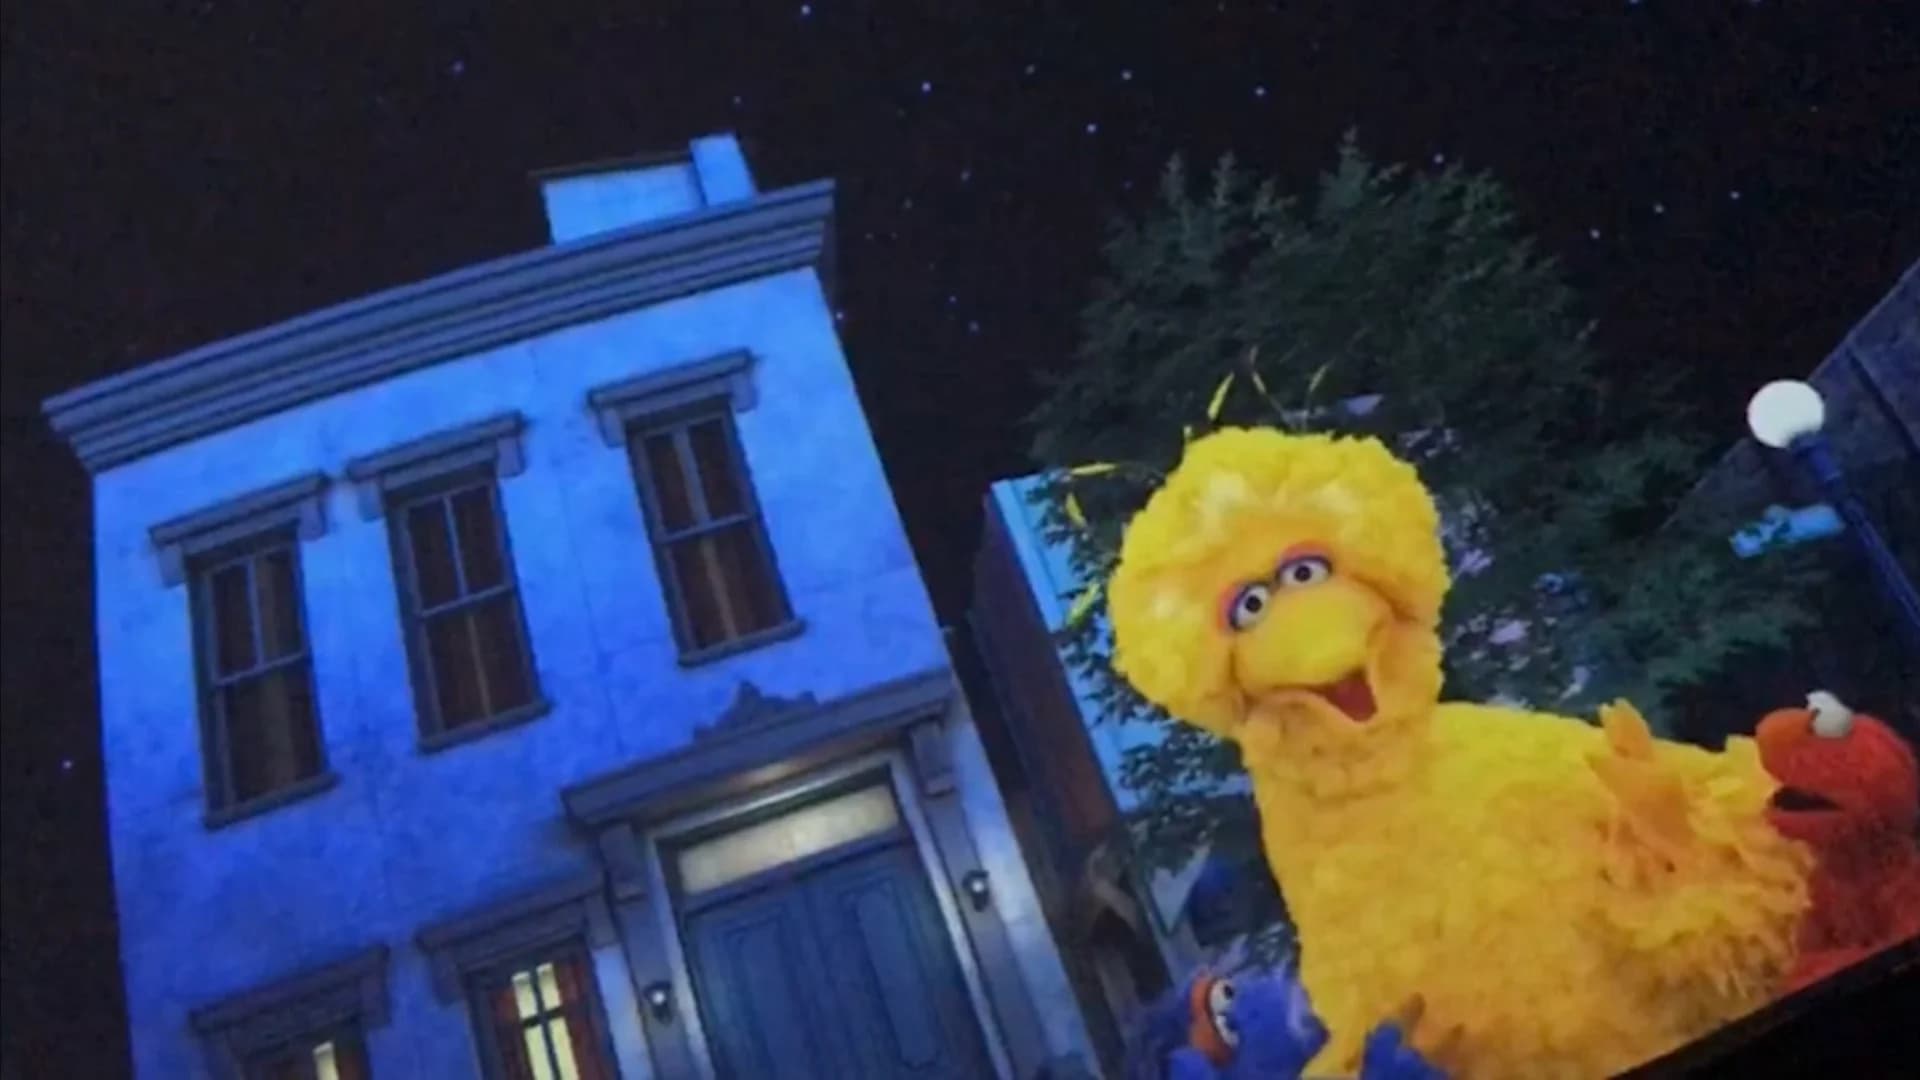 Liberty Science Center hosts ‘Sesame Street’ attraction for show’s 50th anniversary